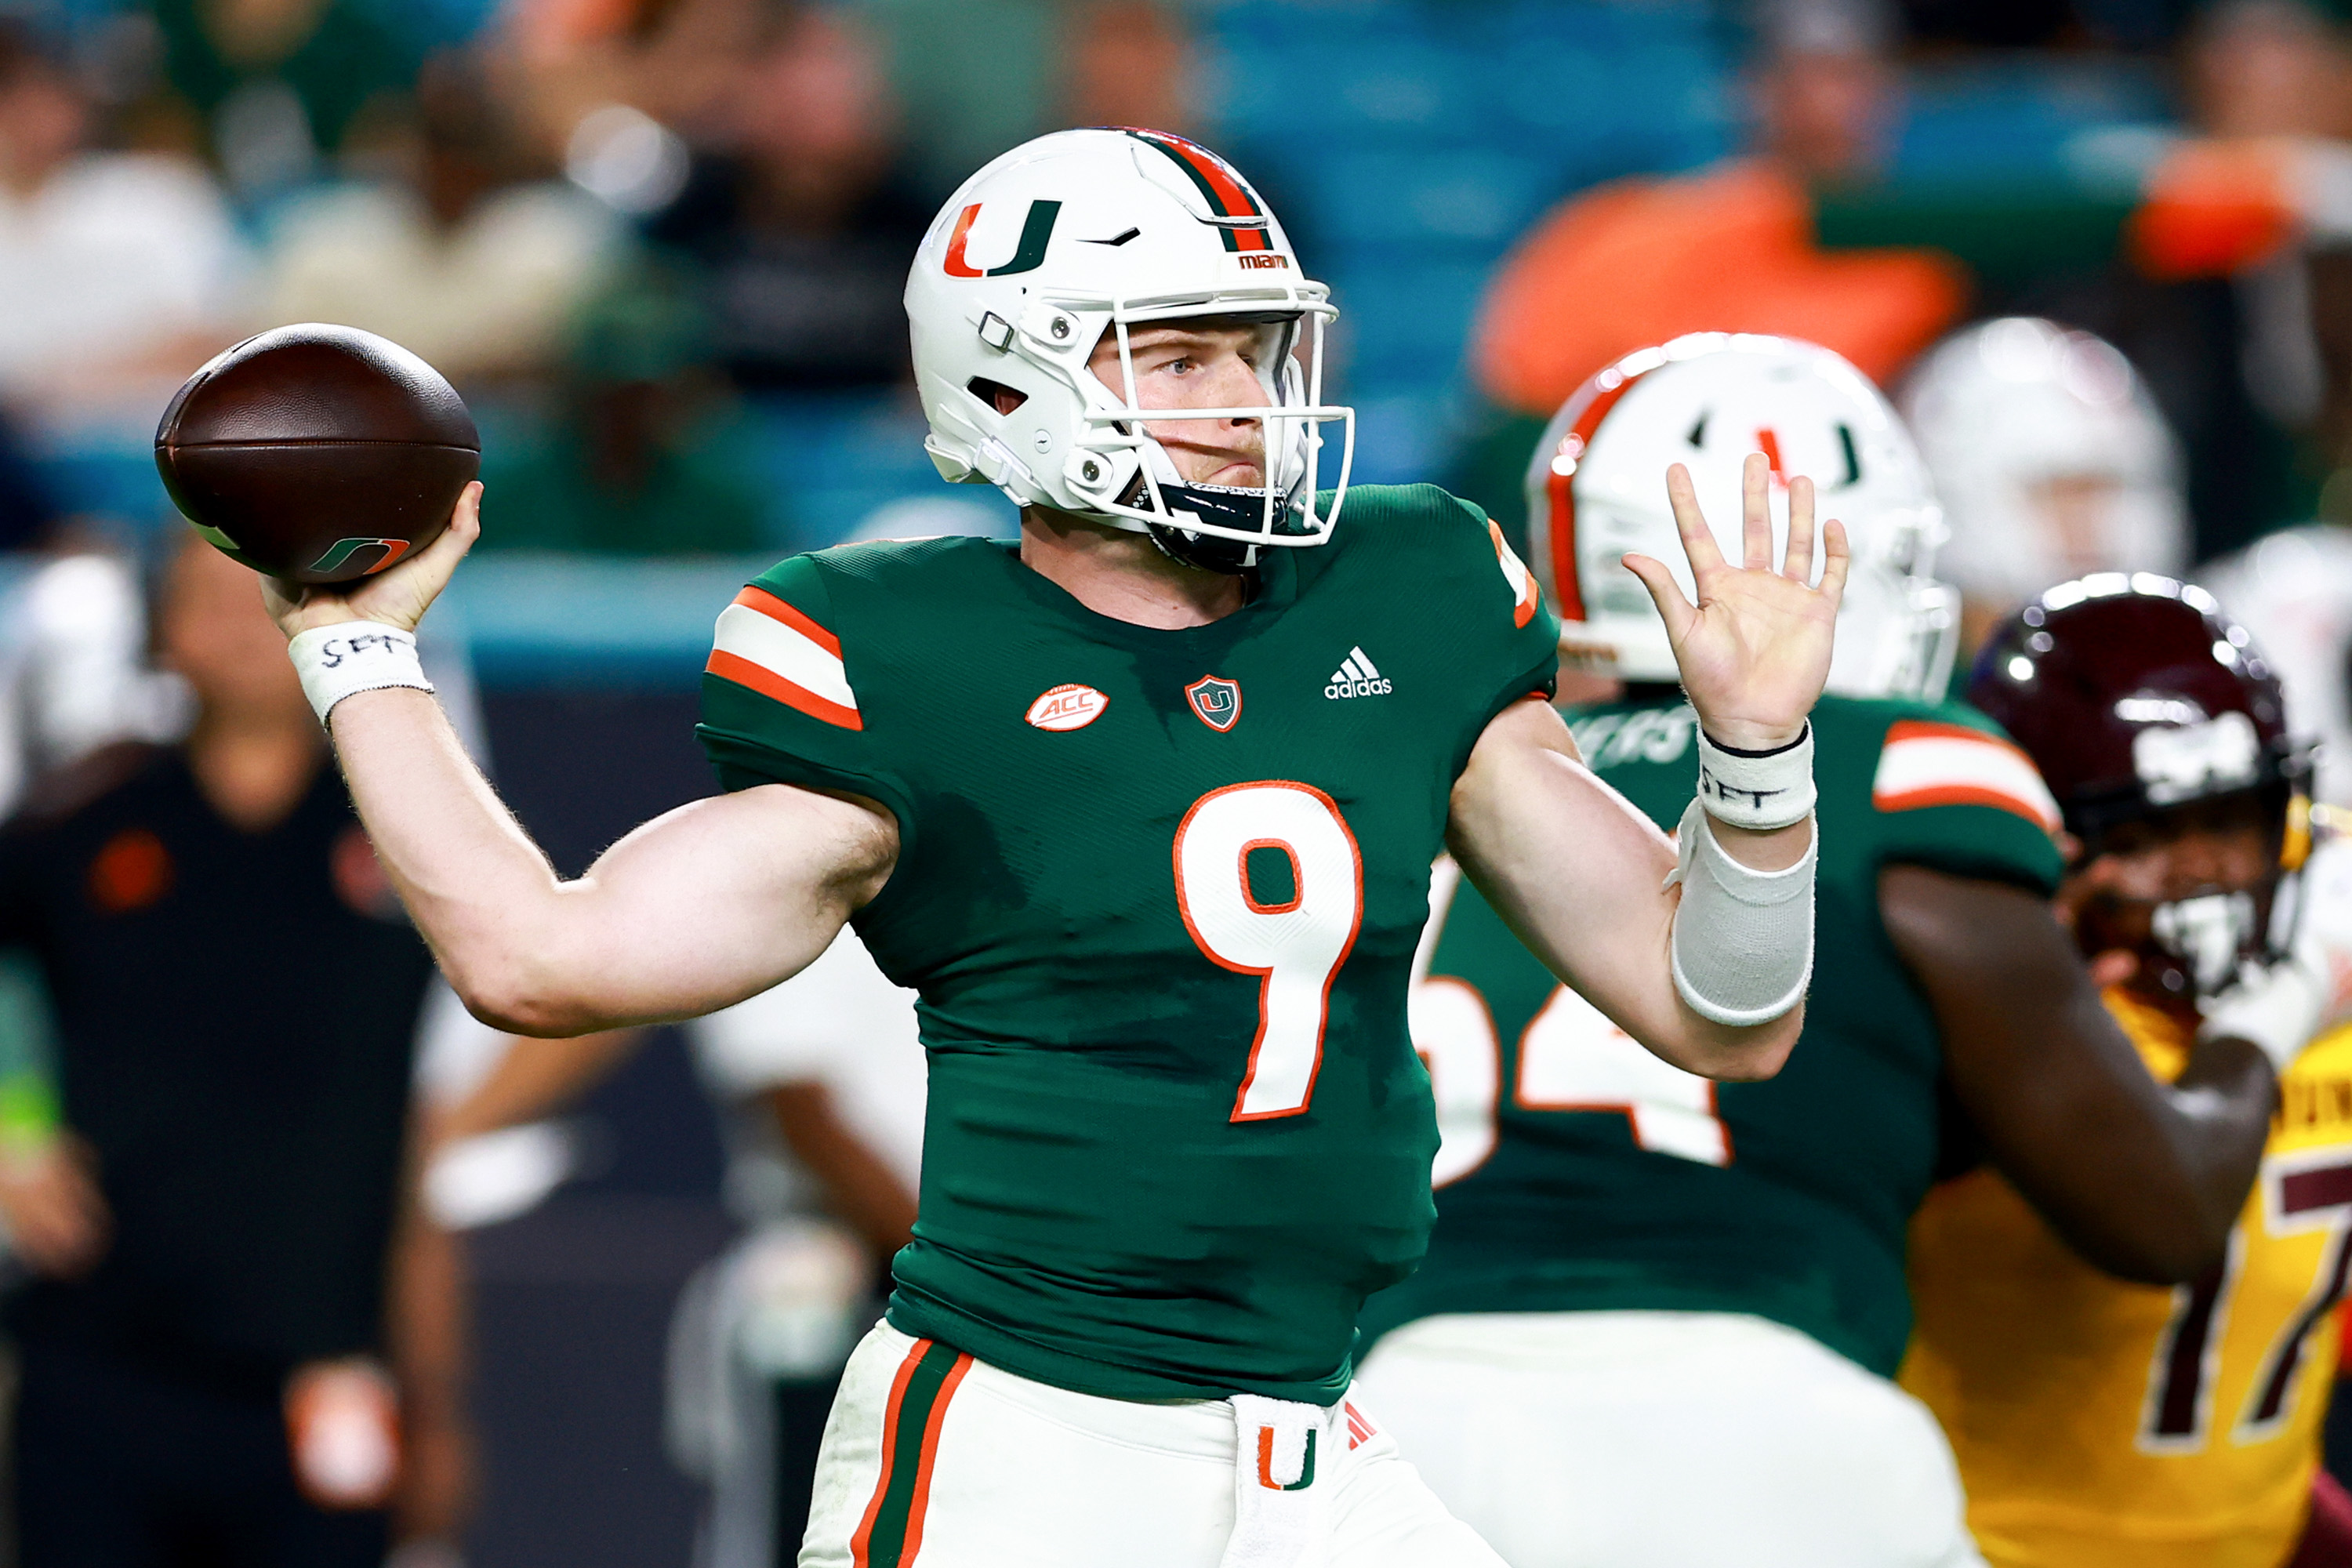 Miami Hurricanes move up to No. 20 in latest AP Poll